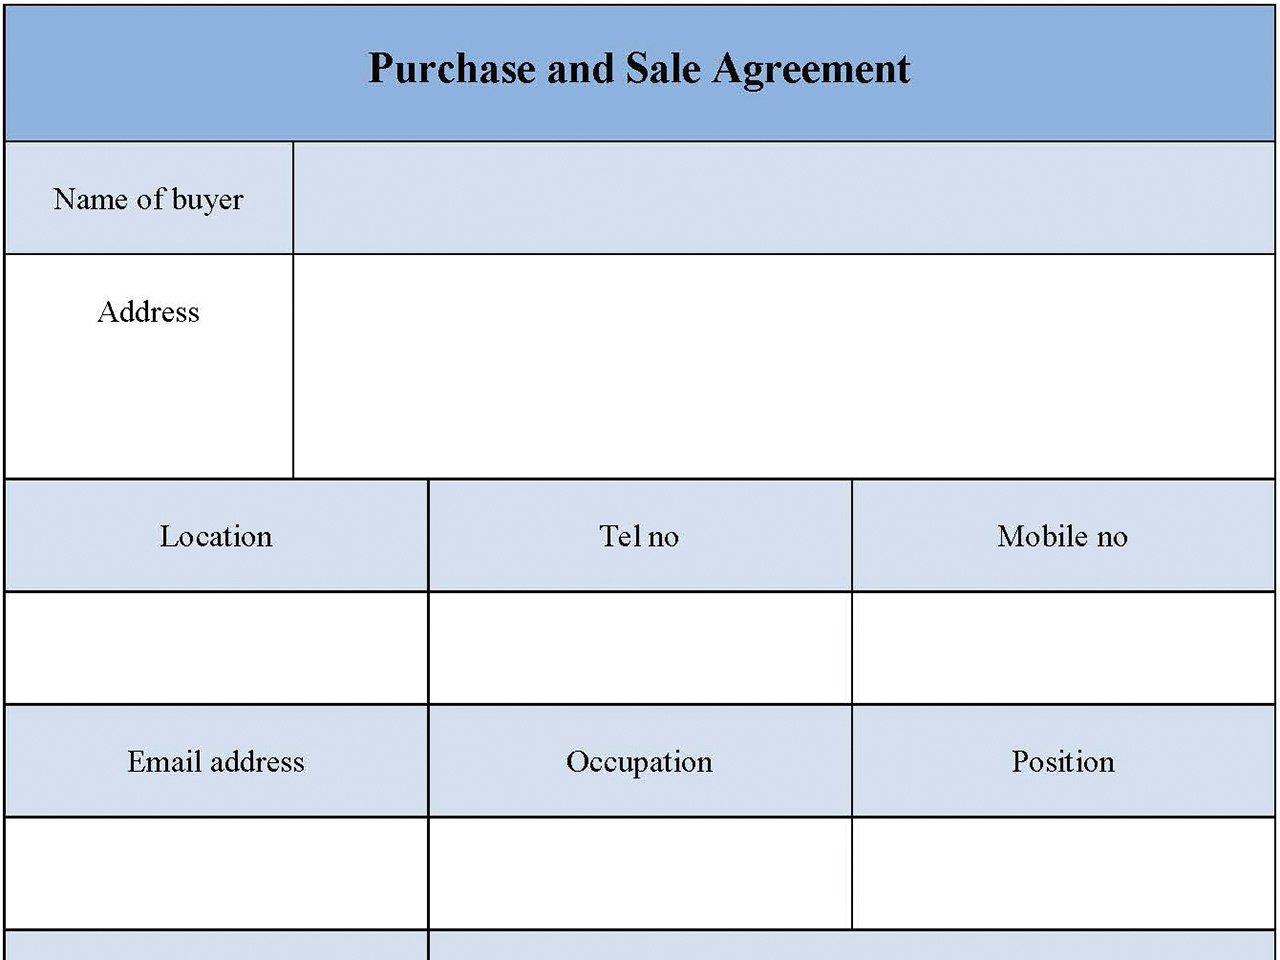 Purchase and Sale Agreement Form